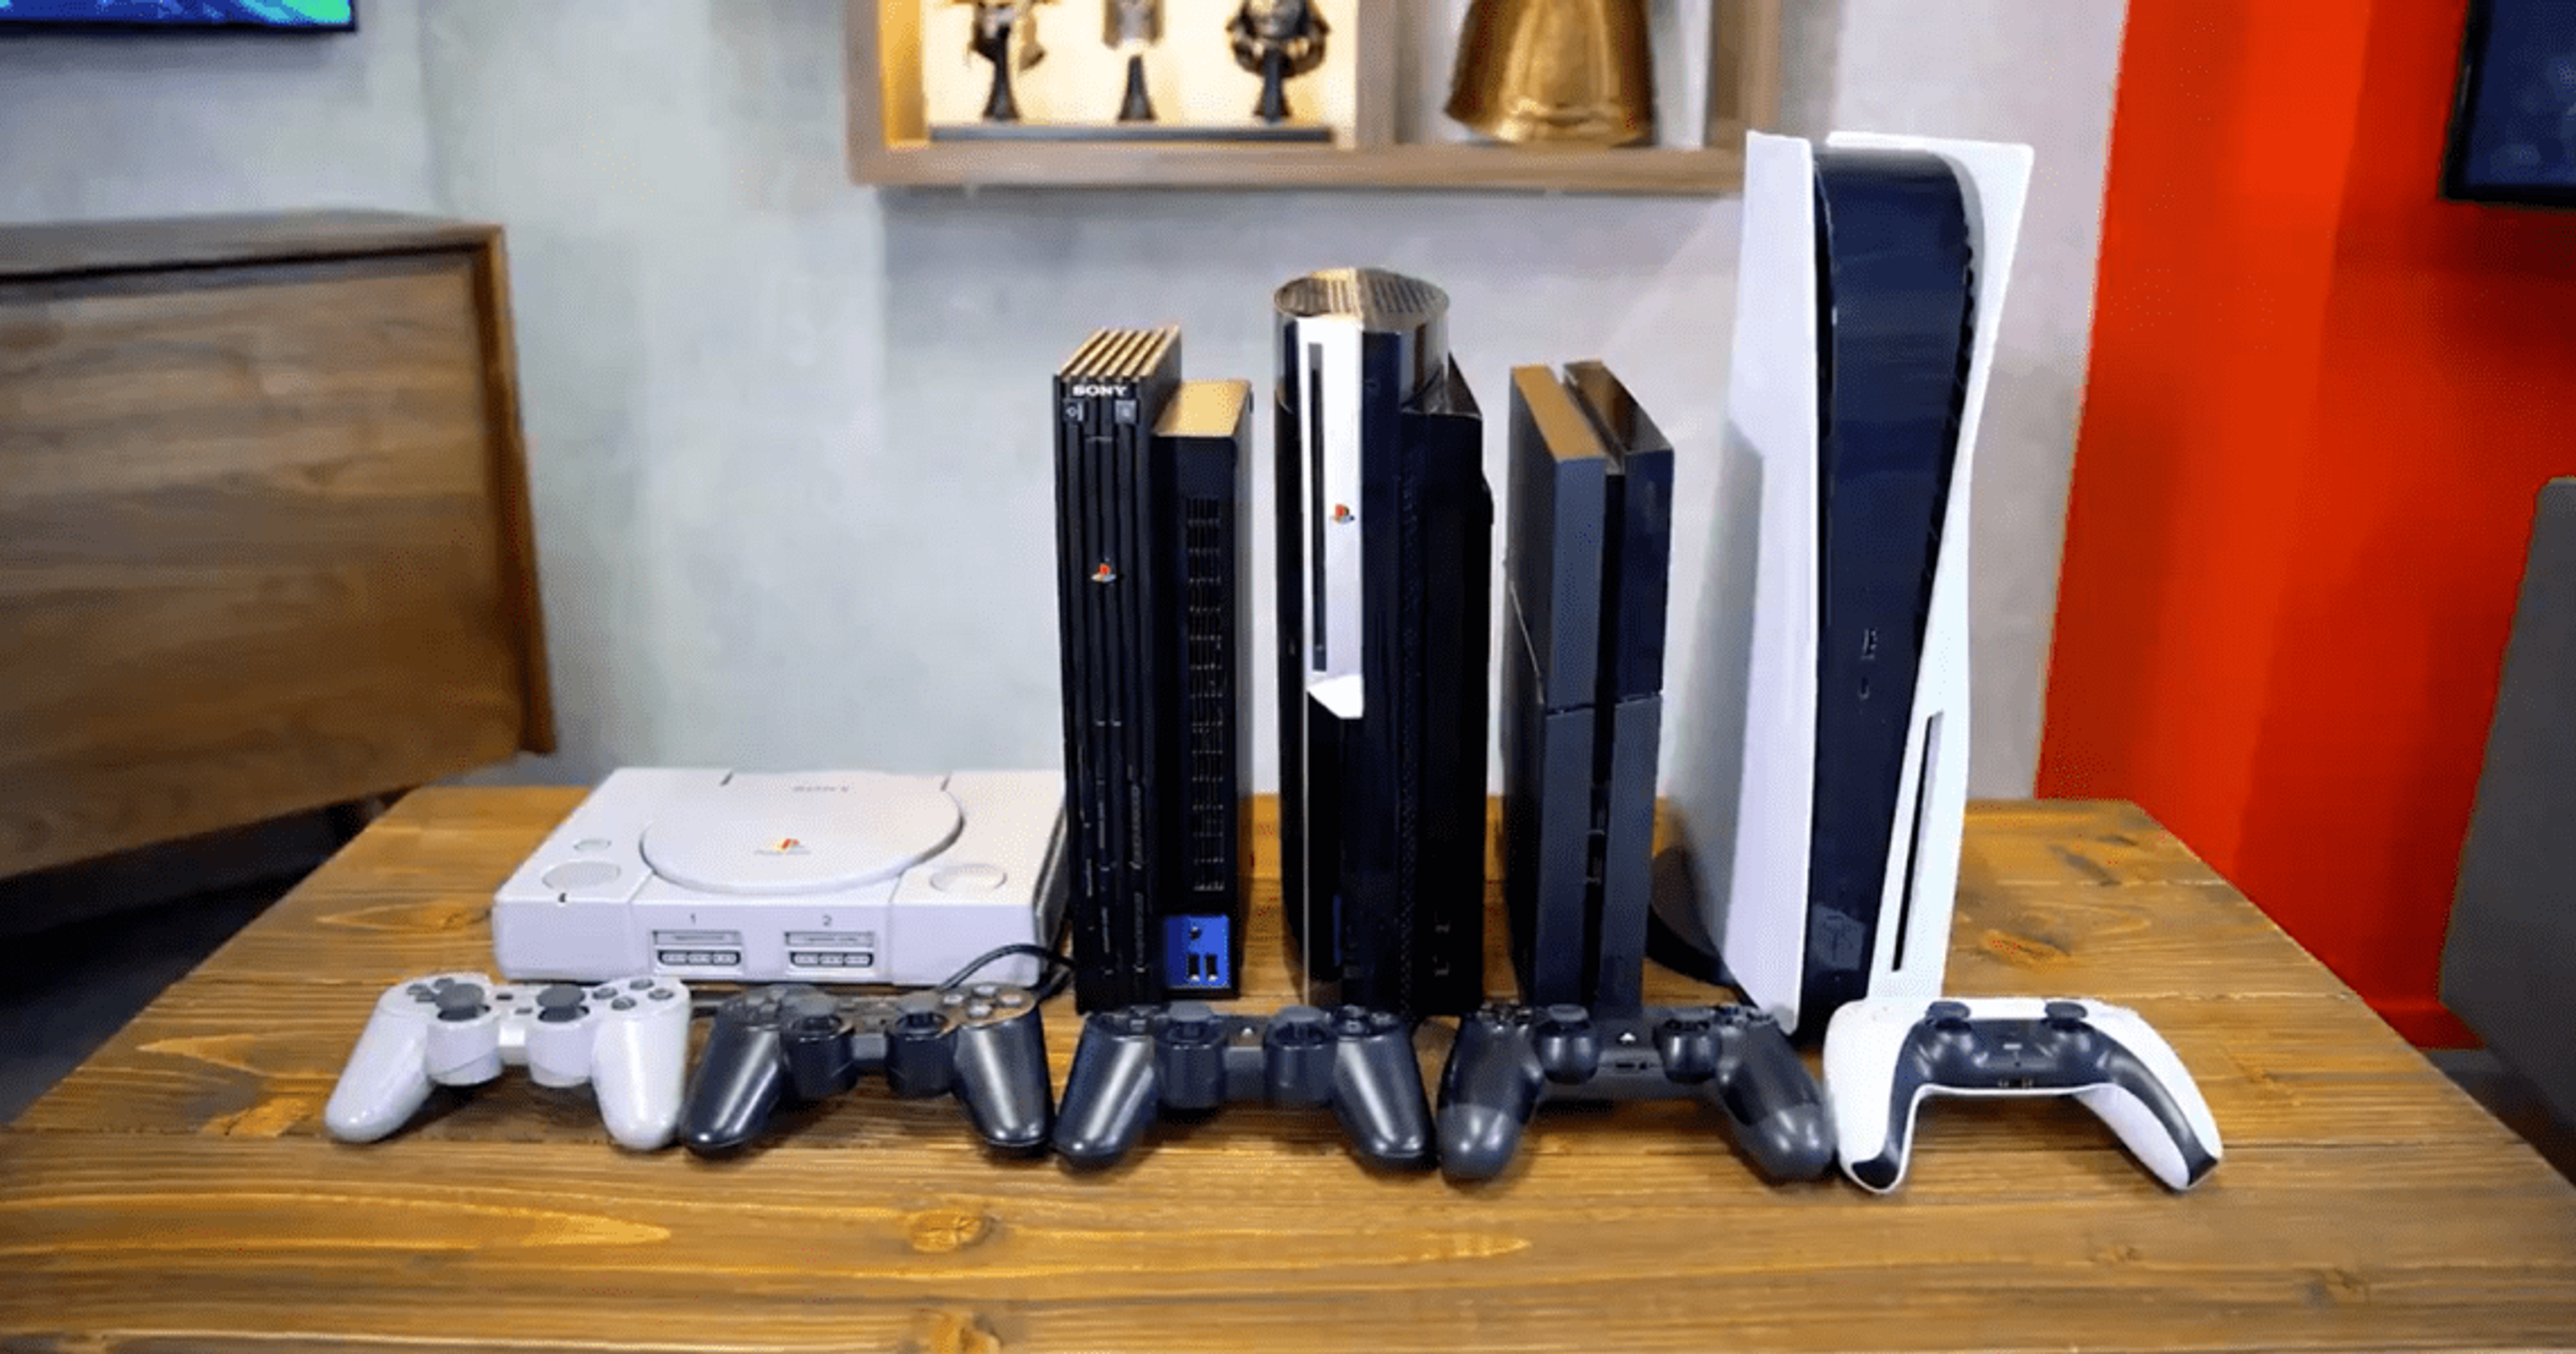 All PlayStation consoles in order | Source